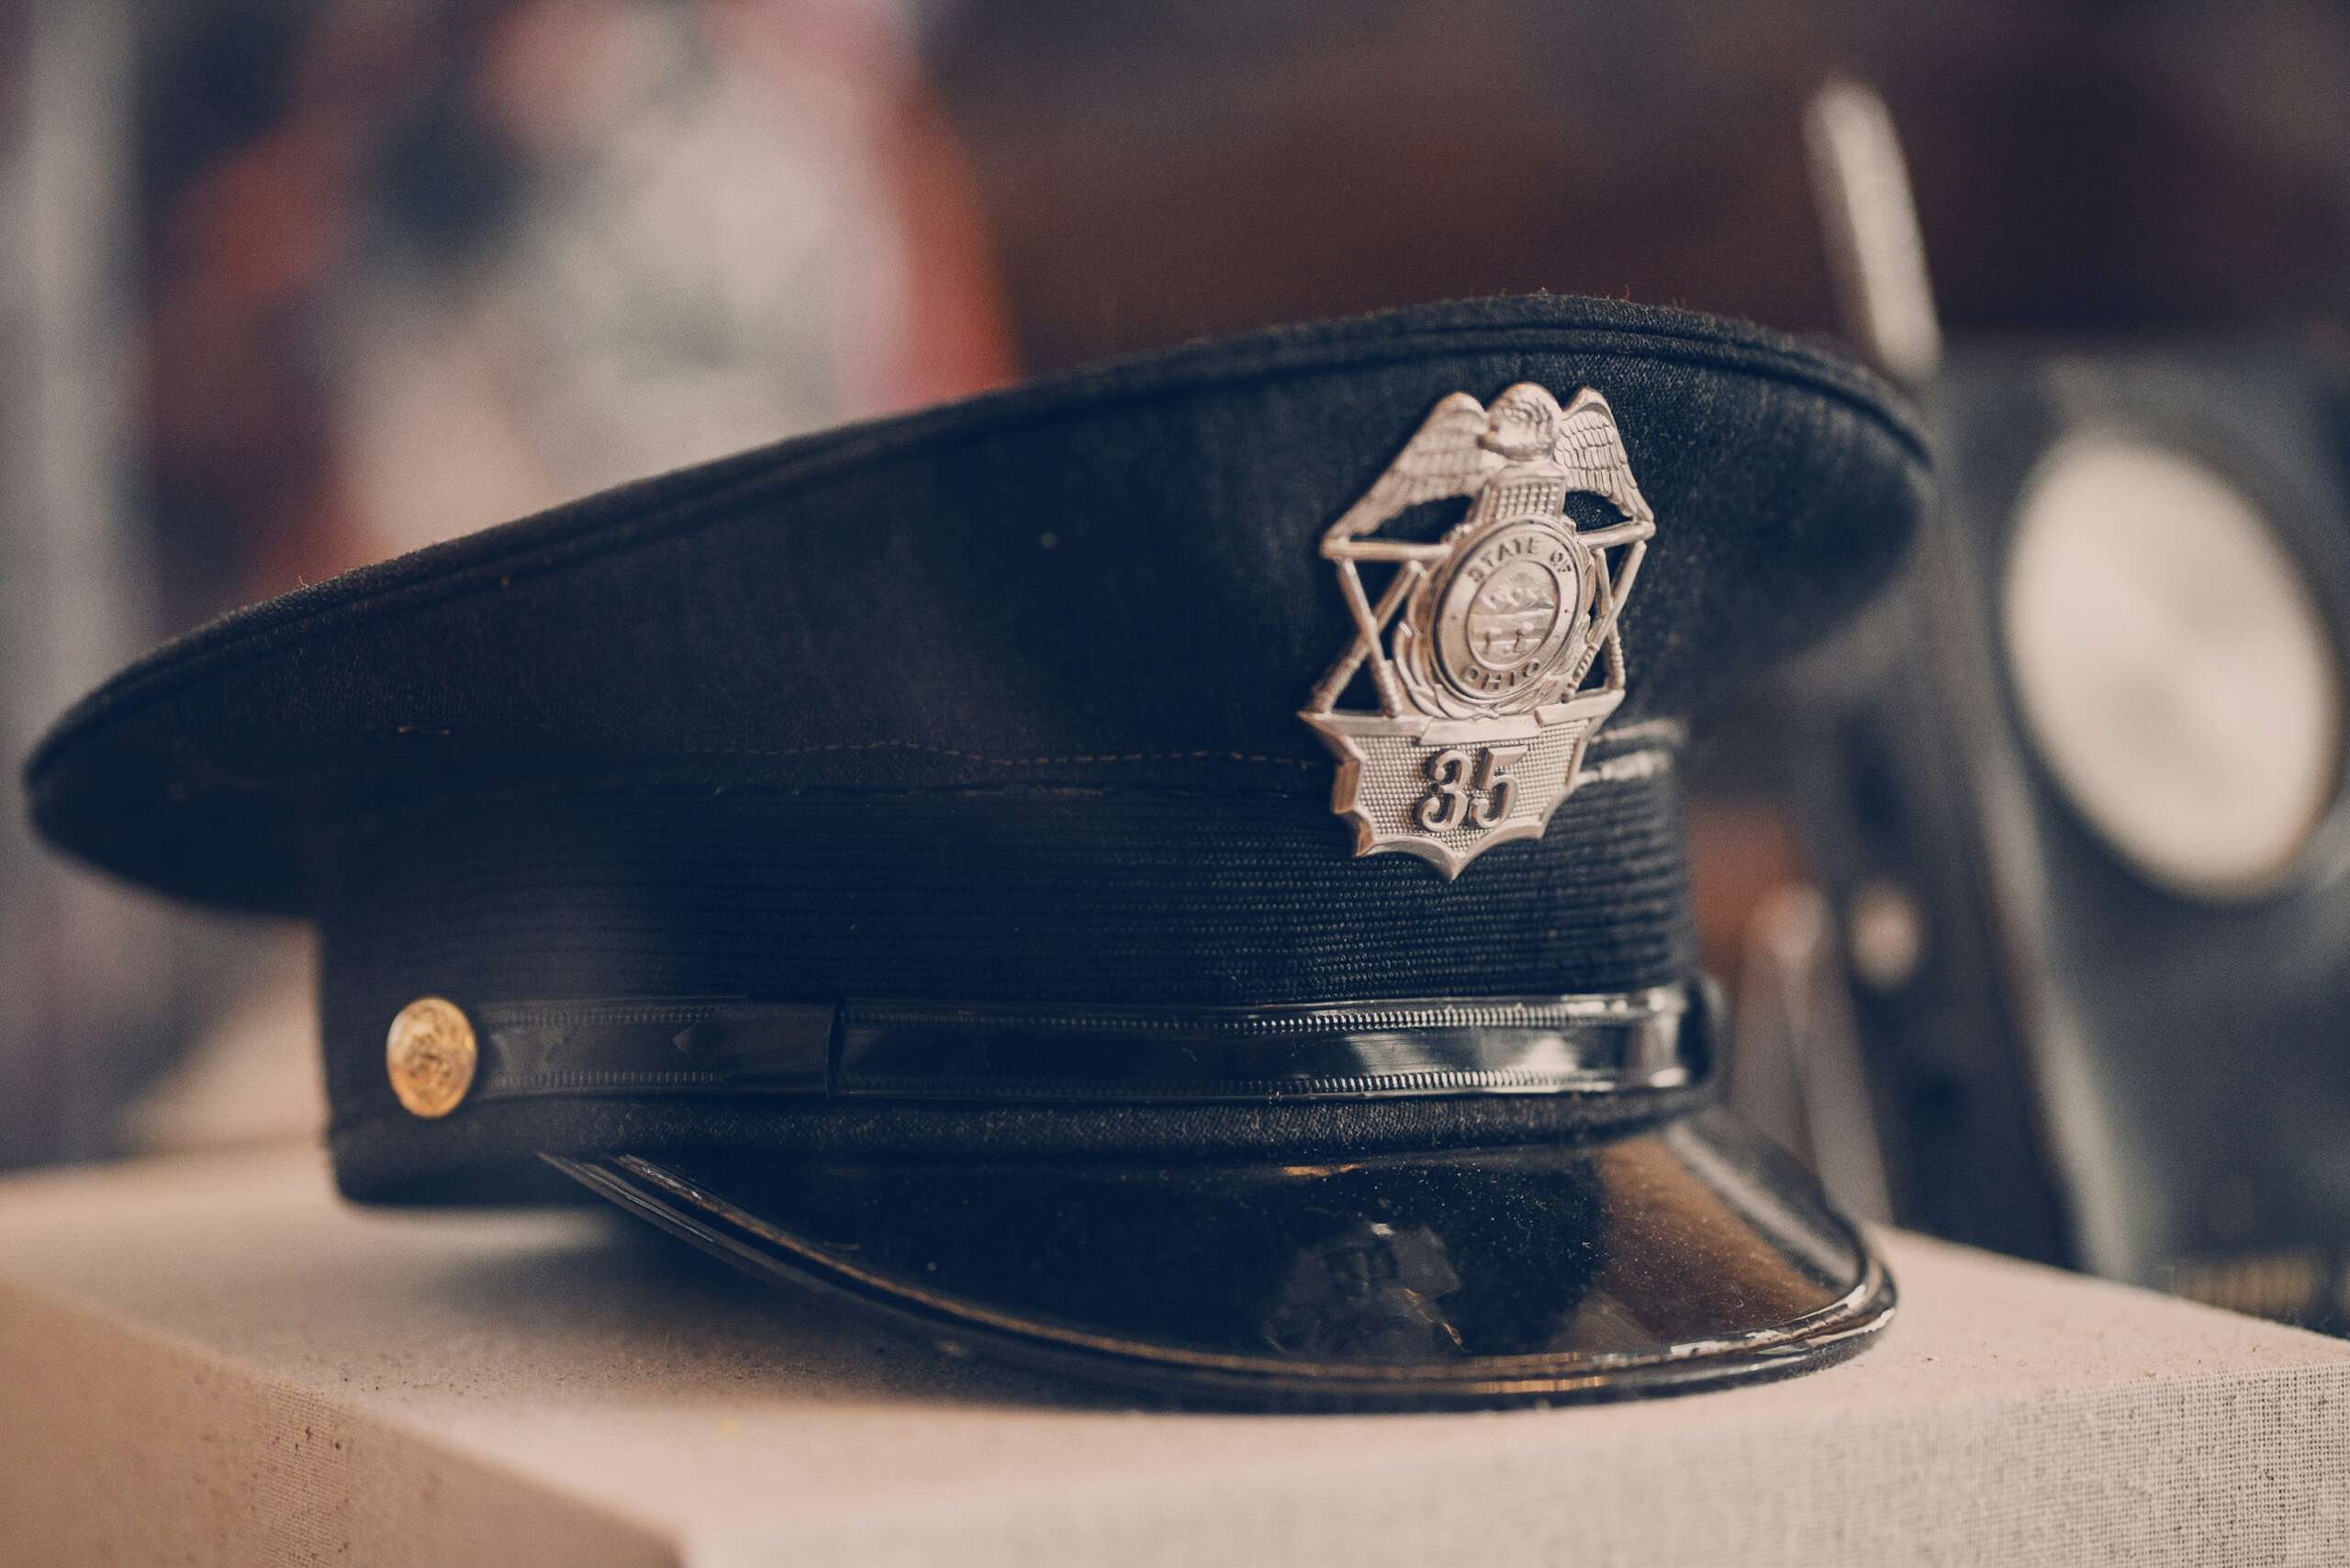 An image of a police hat.